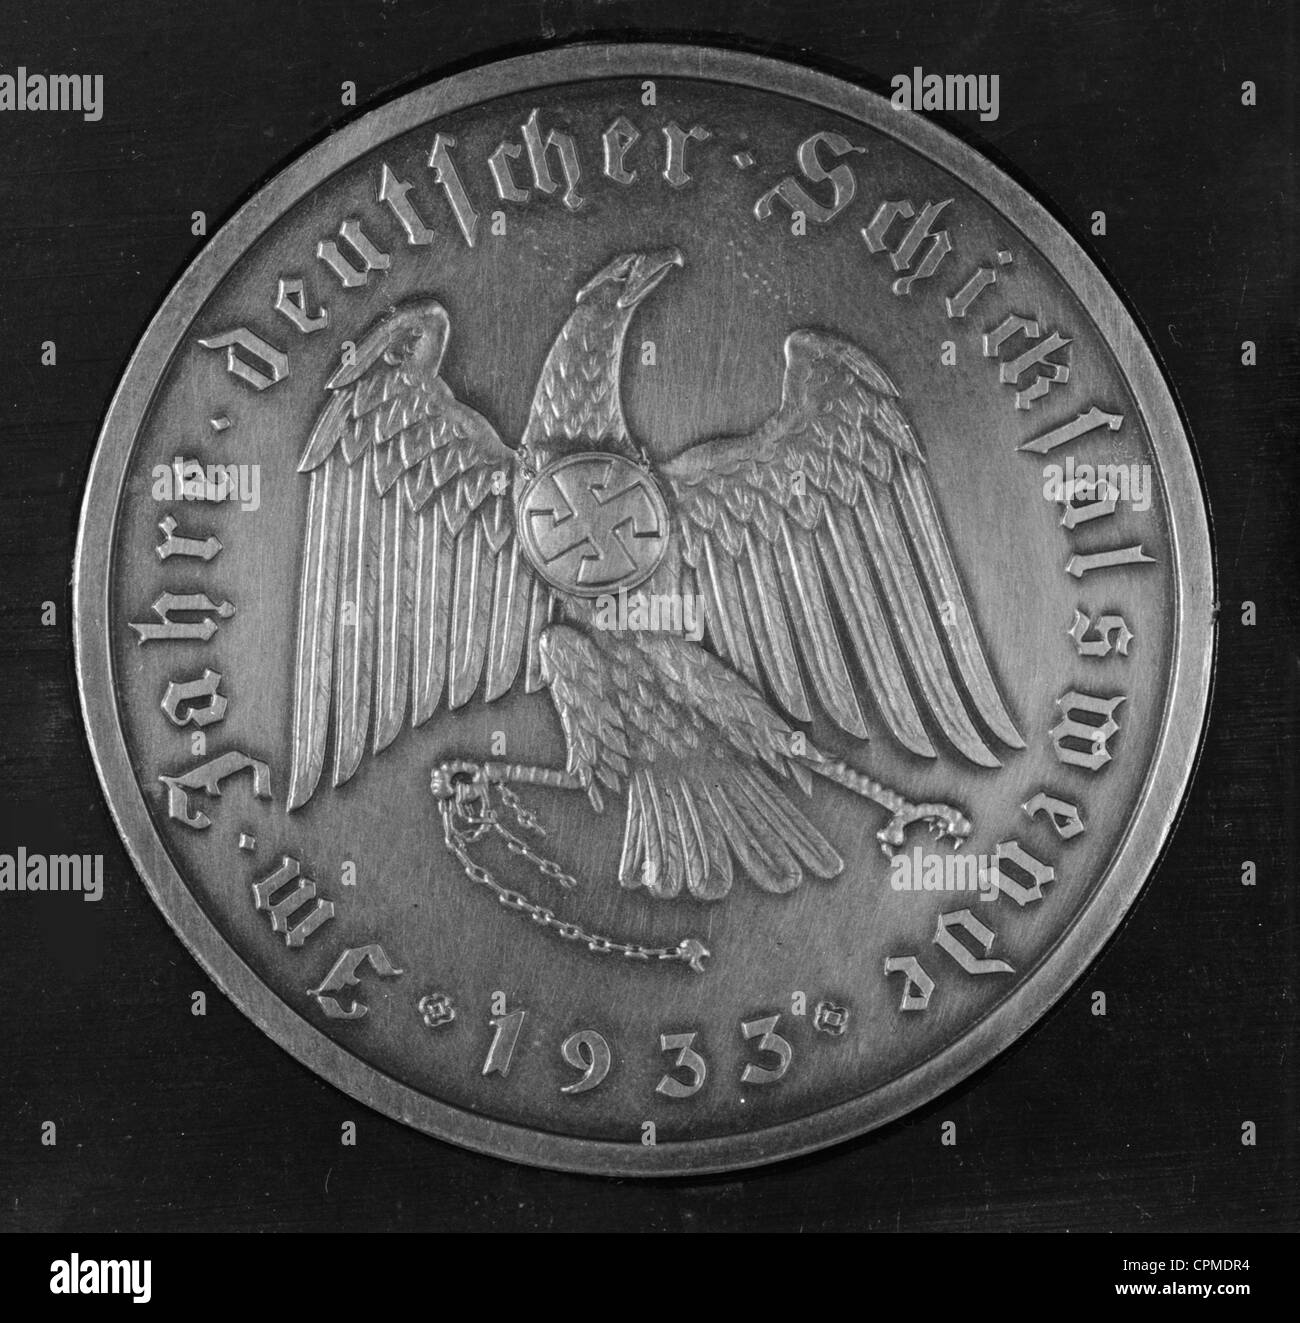 Commemorative coin for the seizure of power of the National Socialists, 1933 Stock Photo